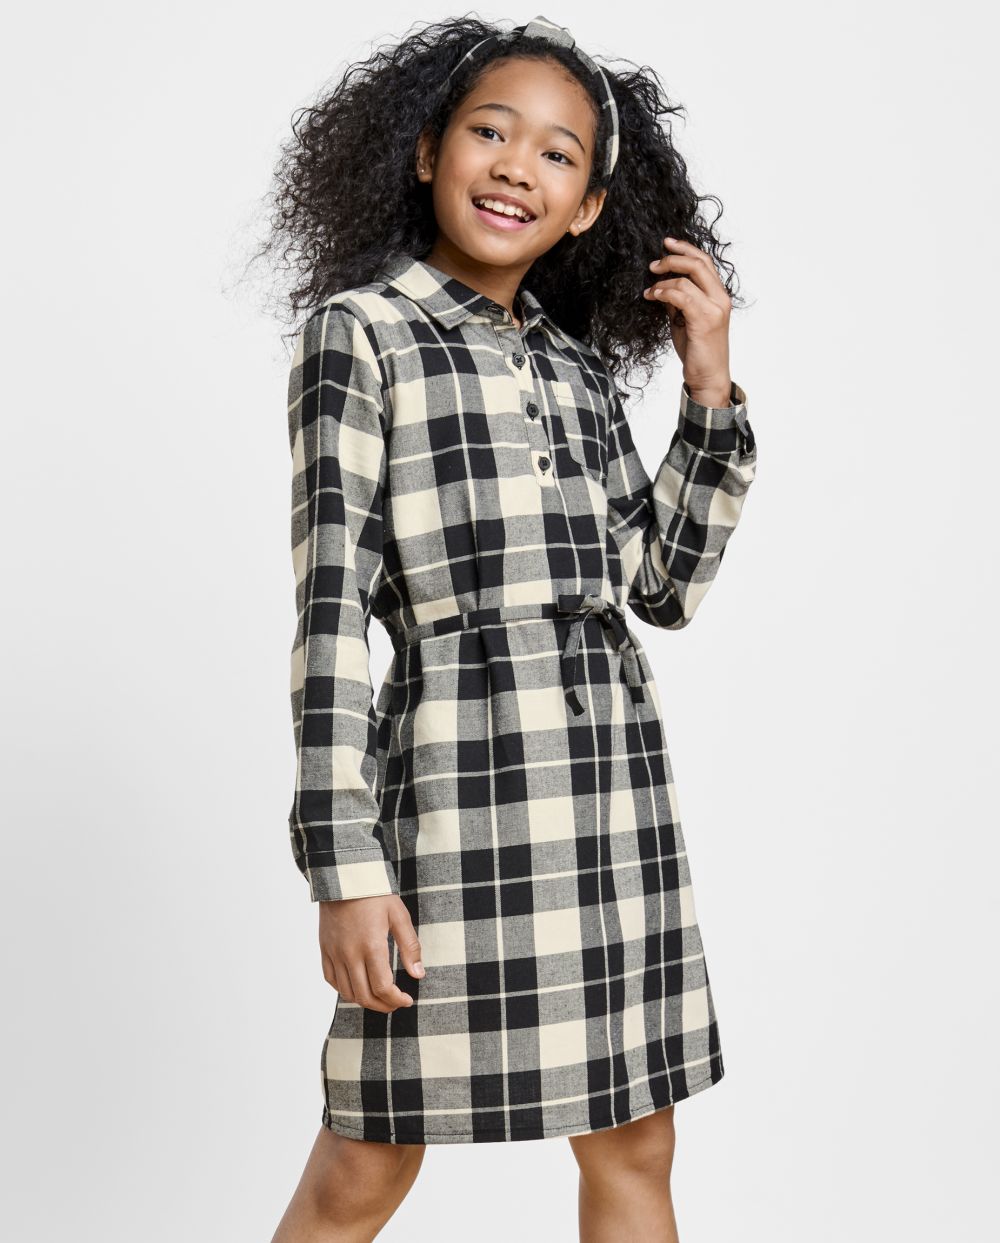 Girls Collared Plaid Print Above the Knee Self Tie Pocketed Belted Tie Waist Waistline Long Sleeves Shirt Dress